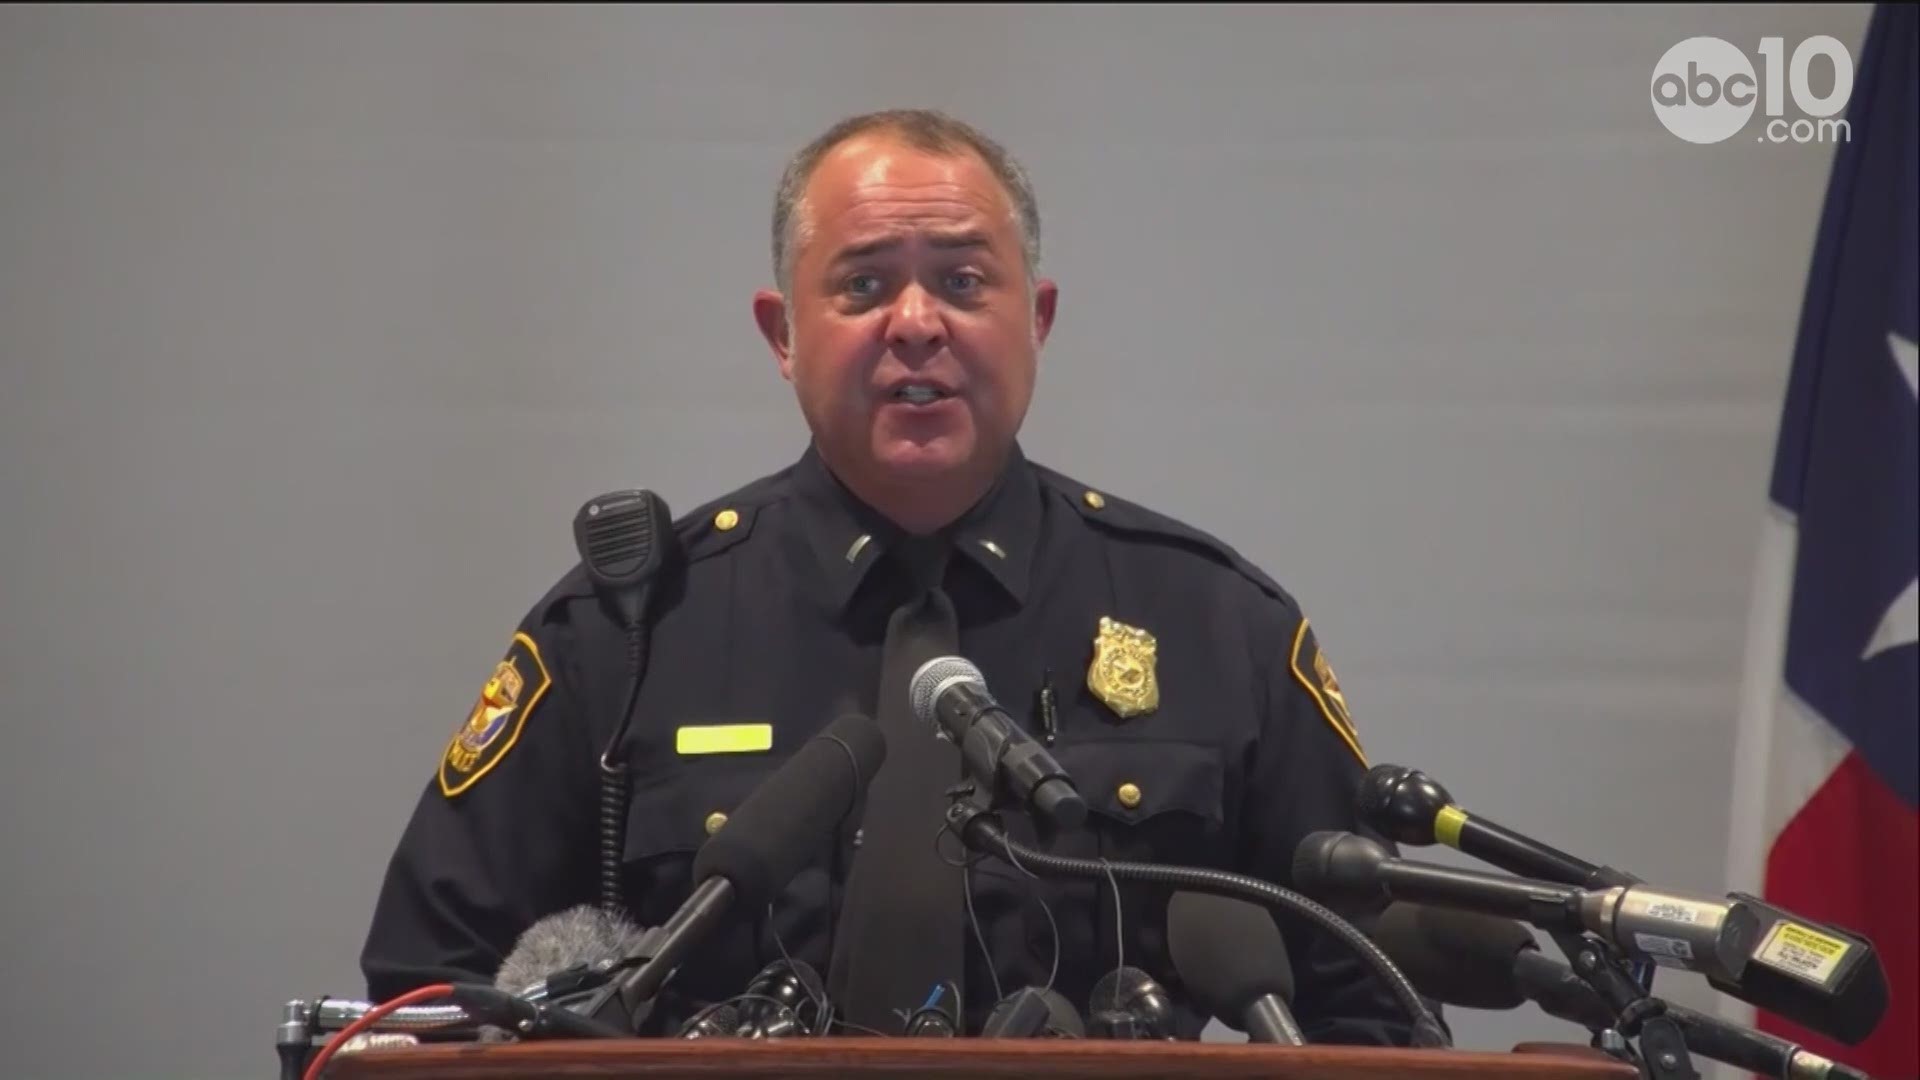 Fort Worth Police Chief Ed Kraus gives an update on the investigation into the shooting death of Atatiana Jefferson and the charges against former officer Aaron Dean